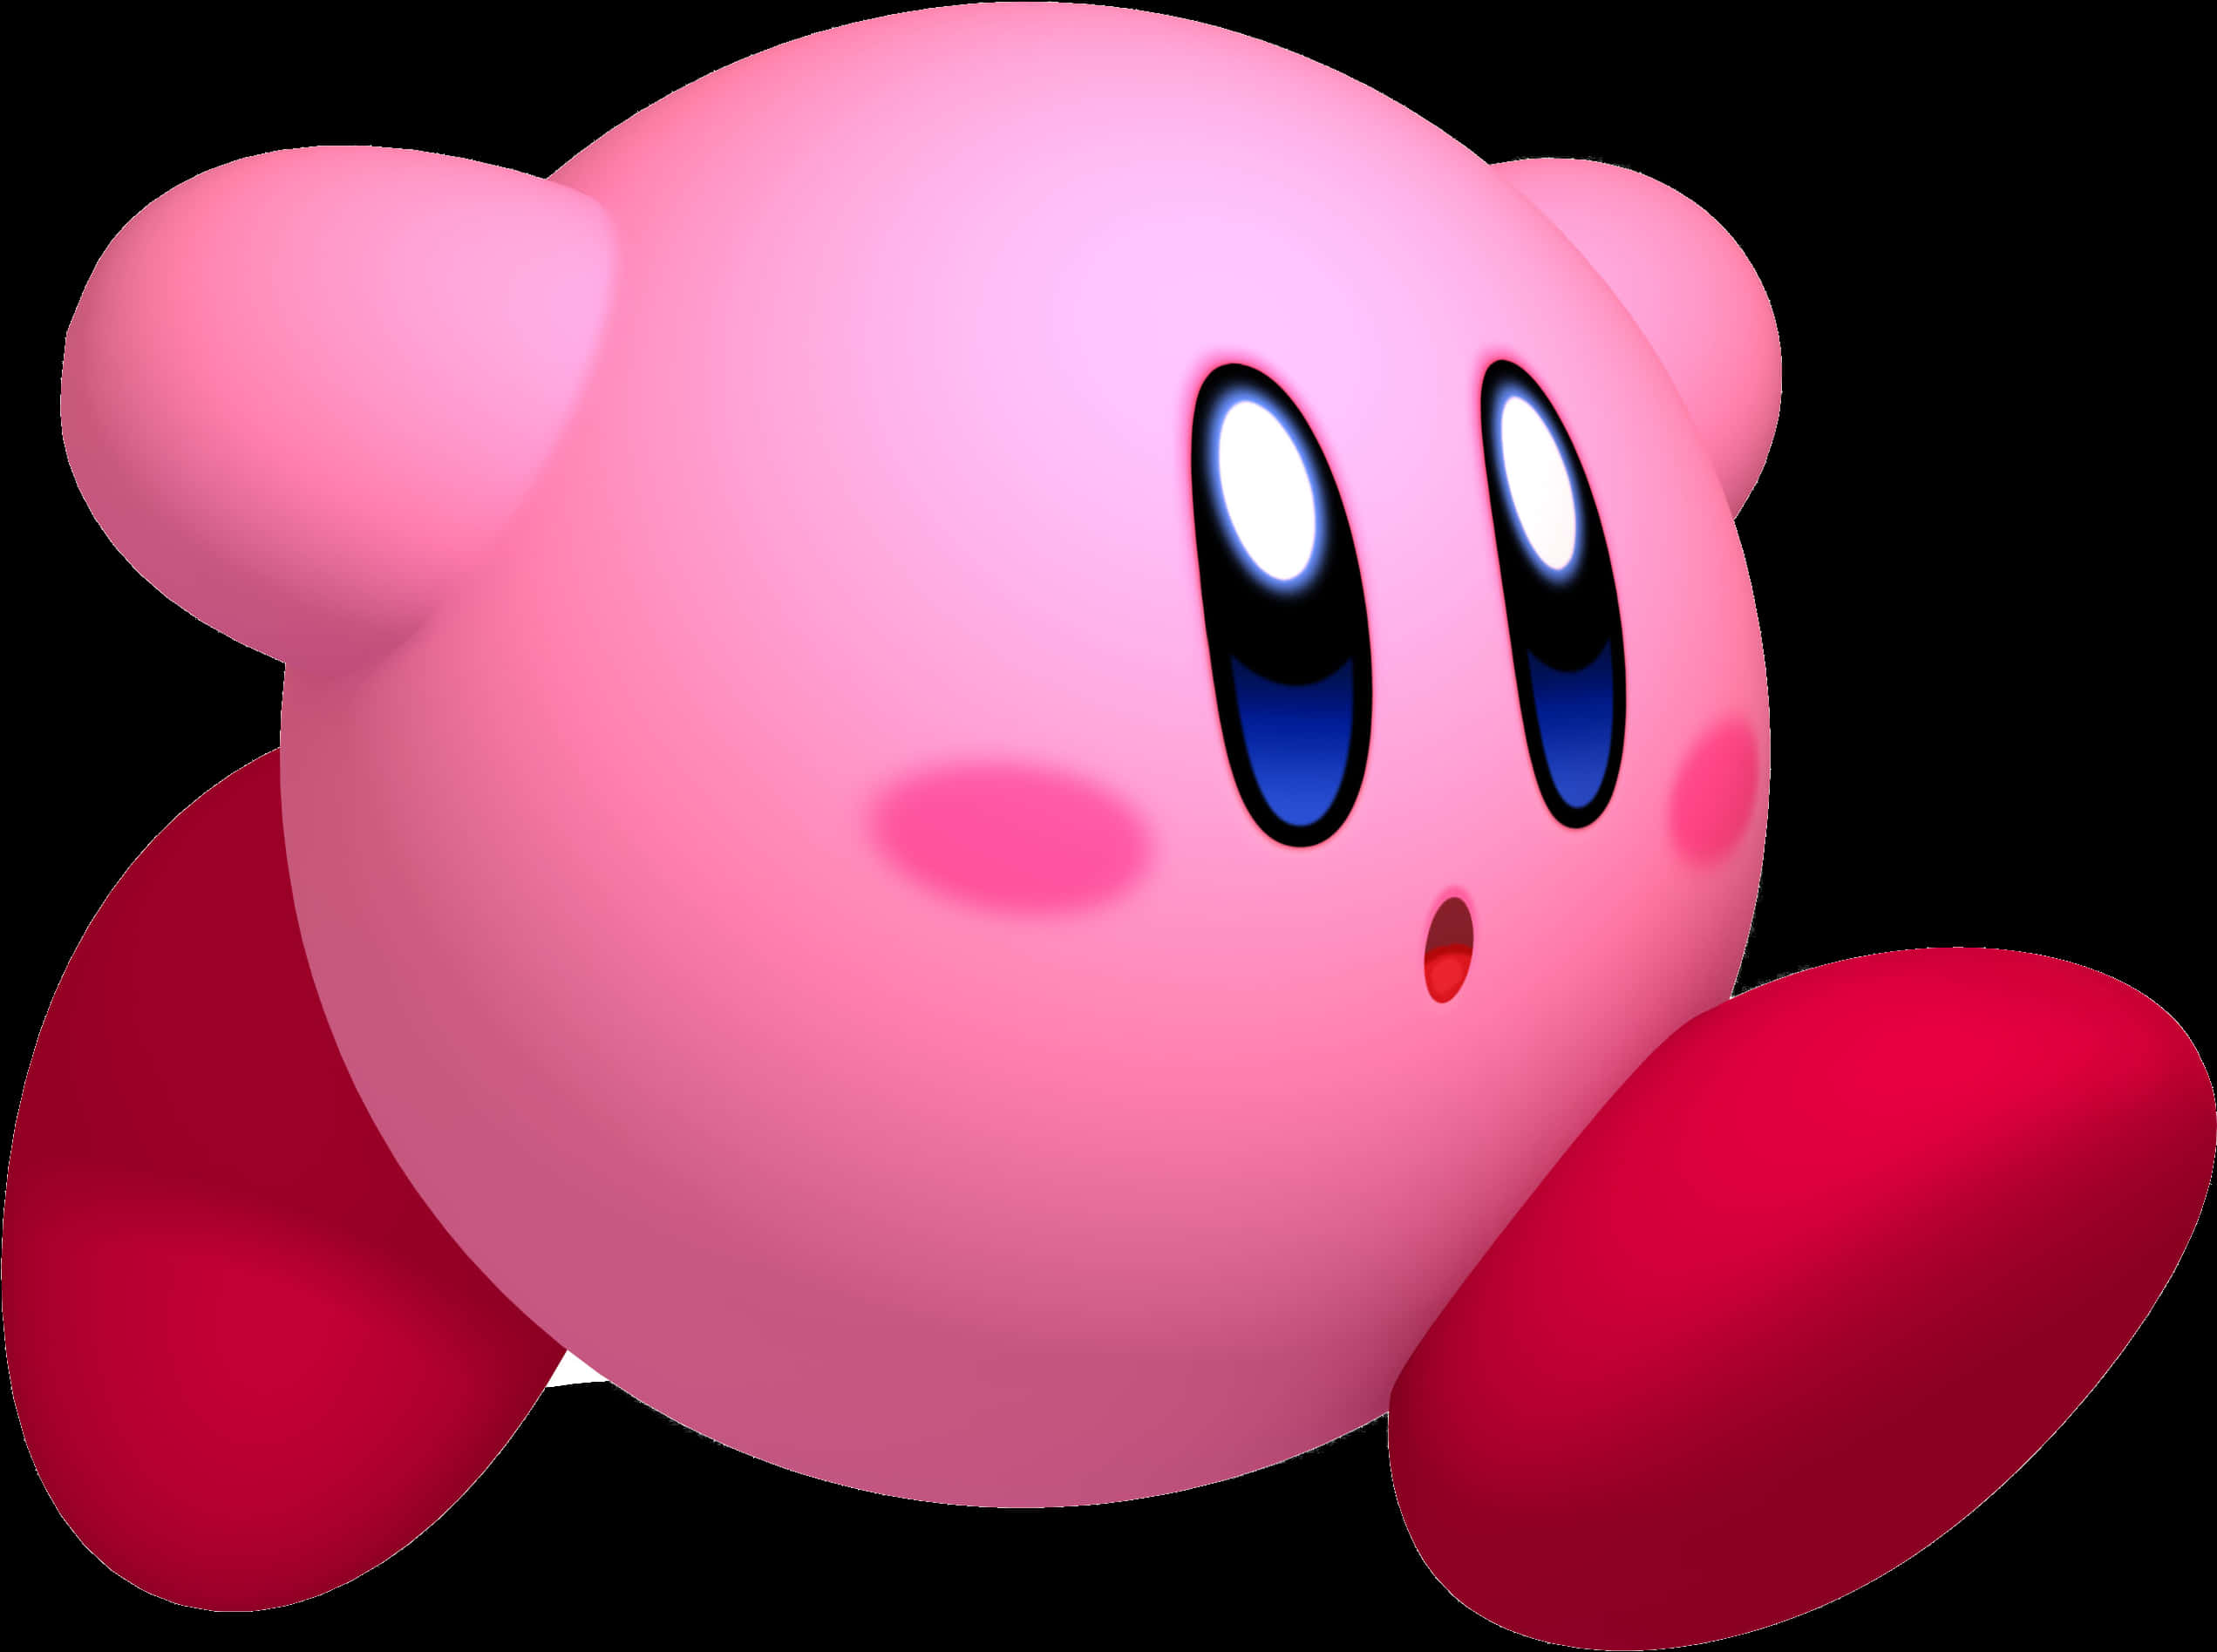 A Pink Round Object With Blue Eyes And Red Arms PNG